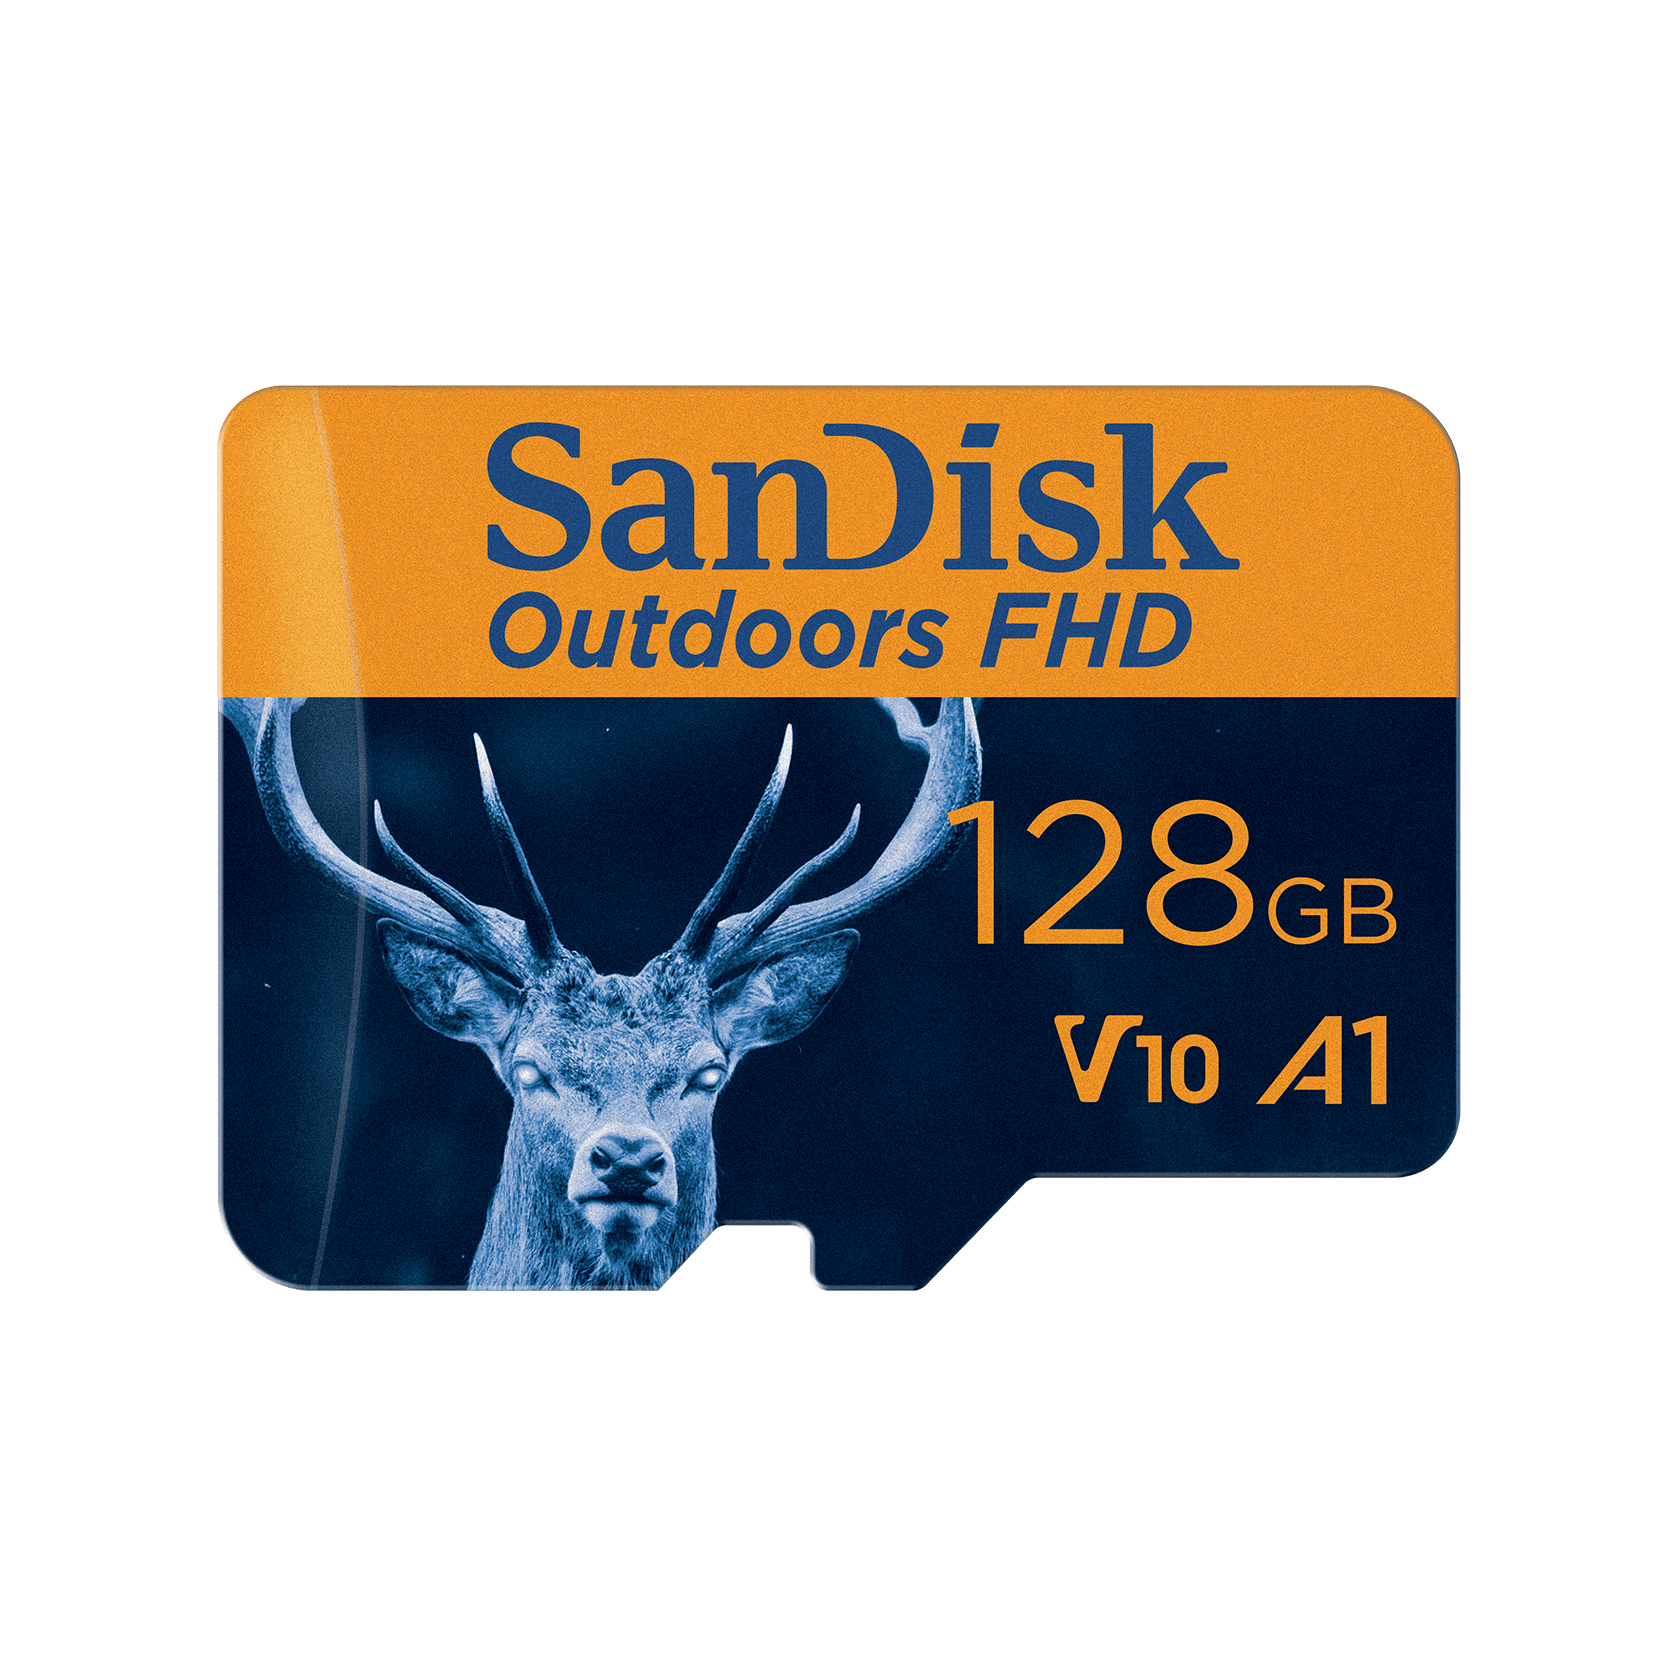 SanDisk Outdoors FHD MicroSDXC UHS-I Card With SD Adapter - 128GB 2-Pack - SDSQUBC-128G-GN6VT